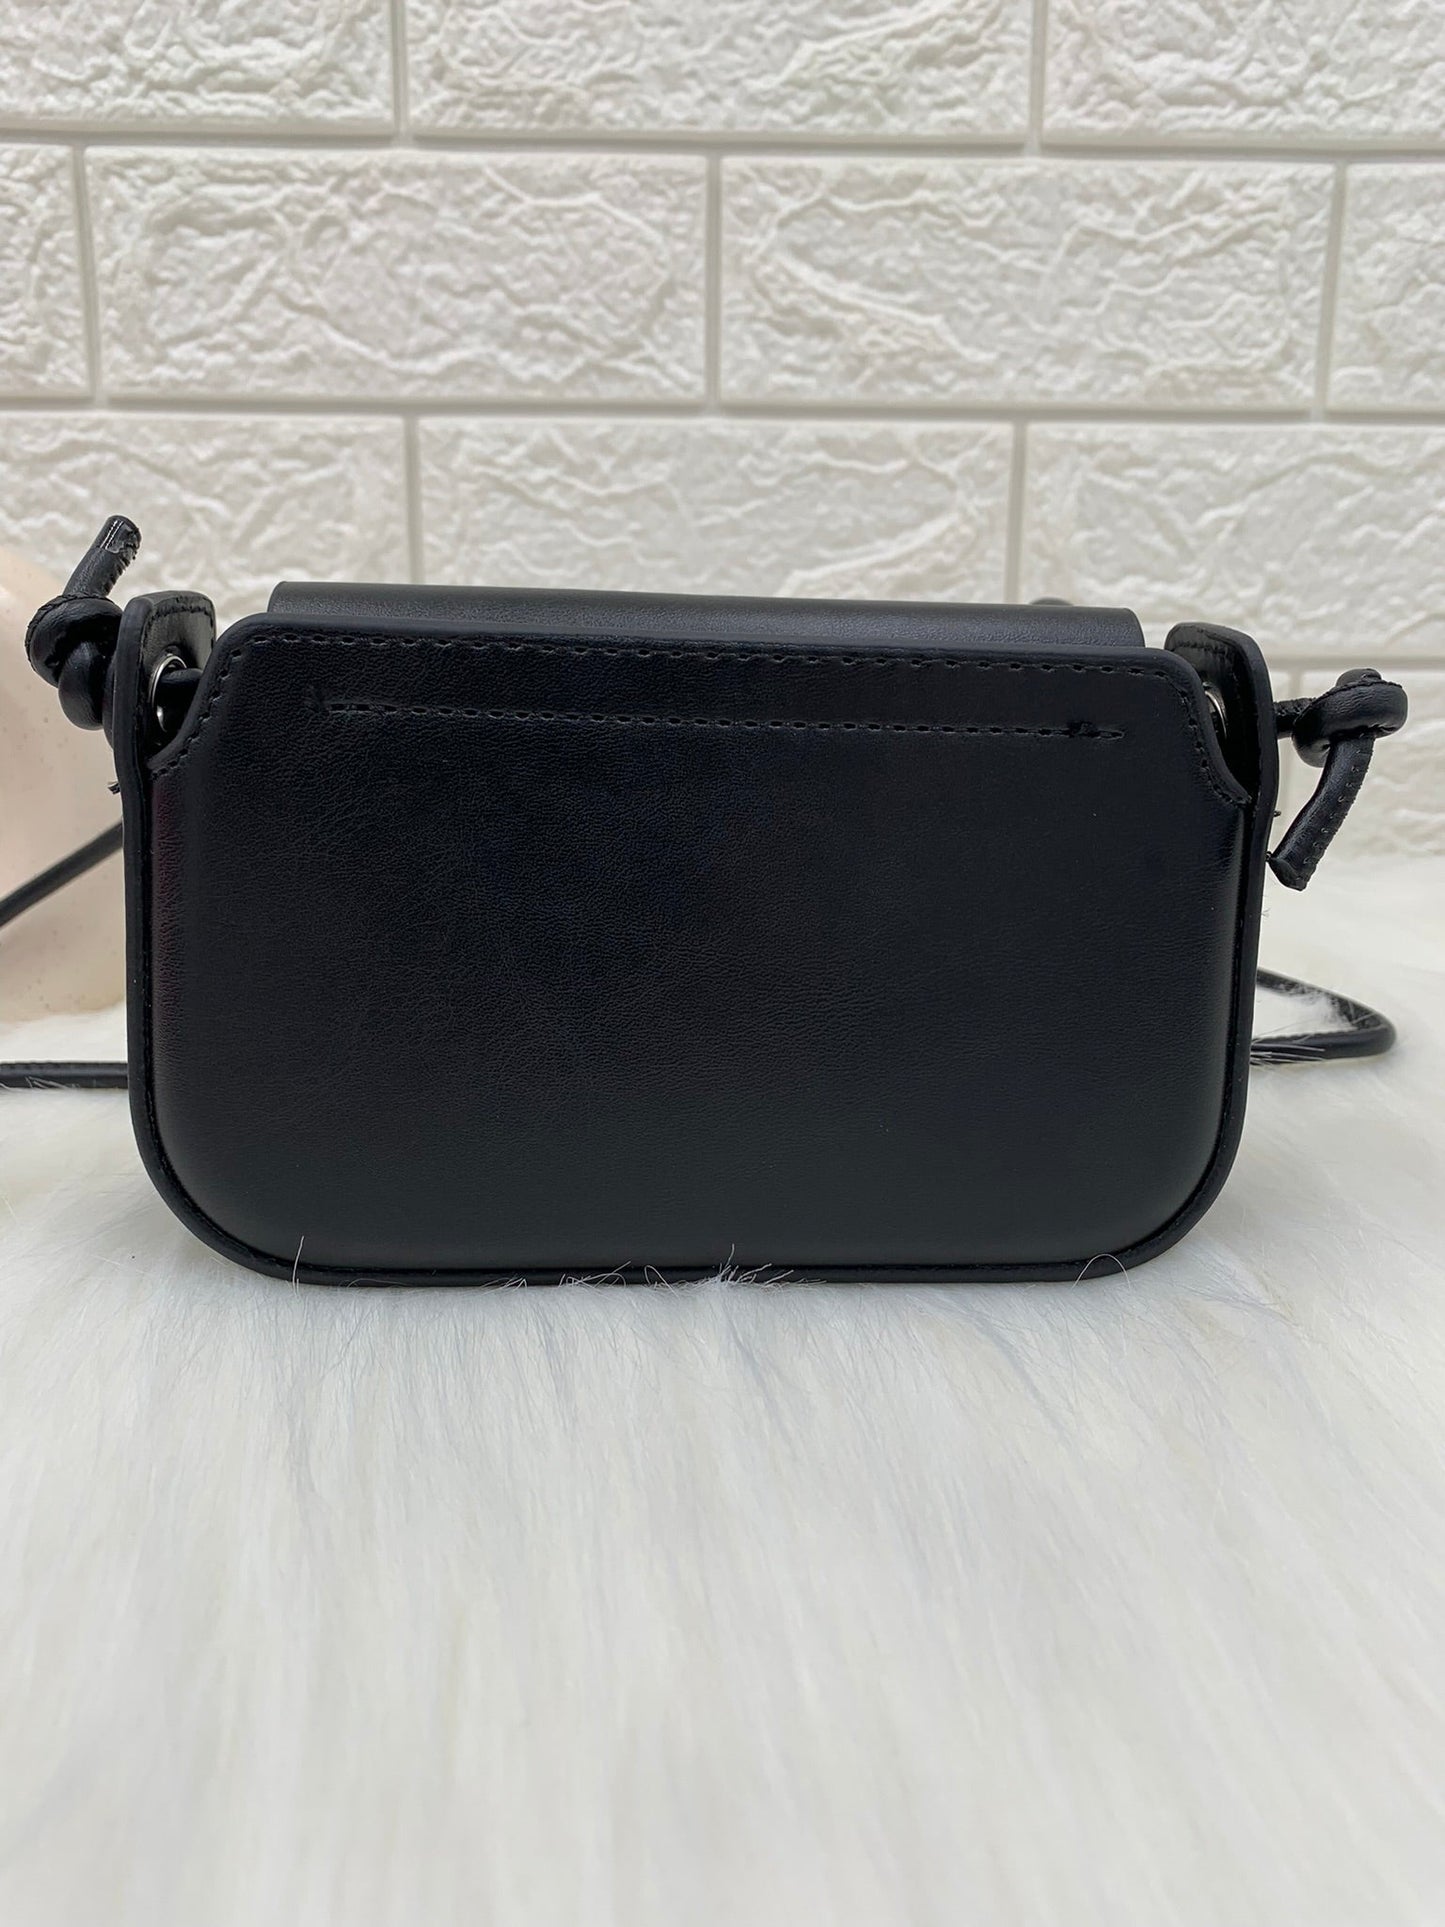 Black Textured PU Small Structured Sling Bag